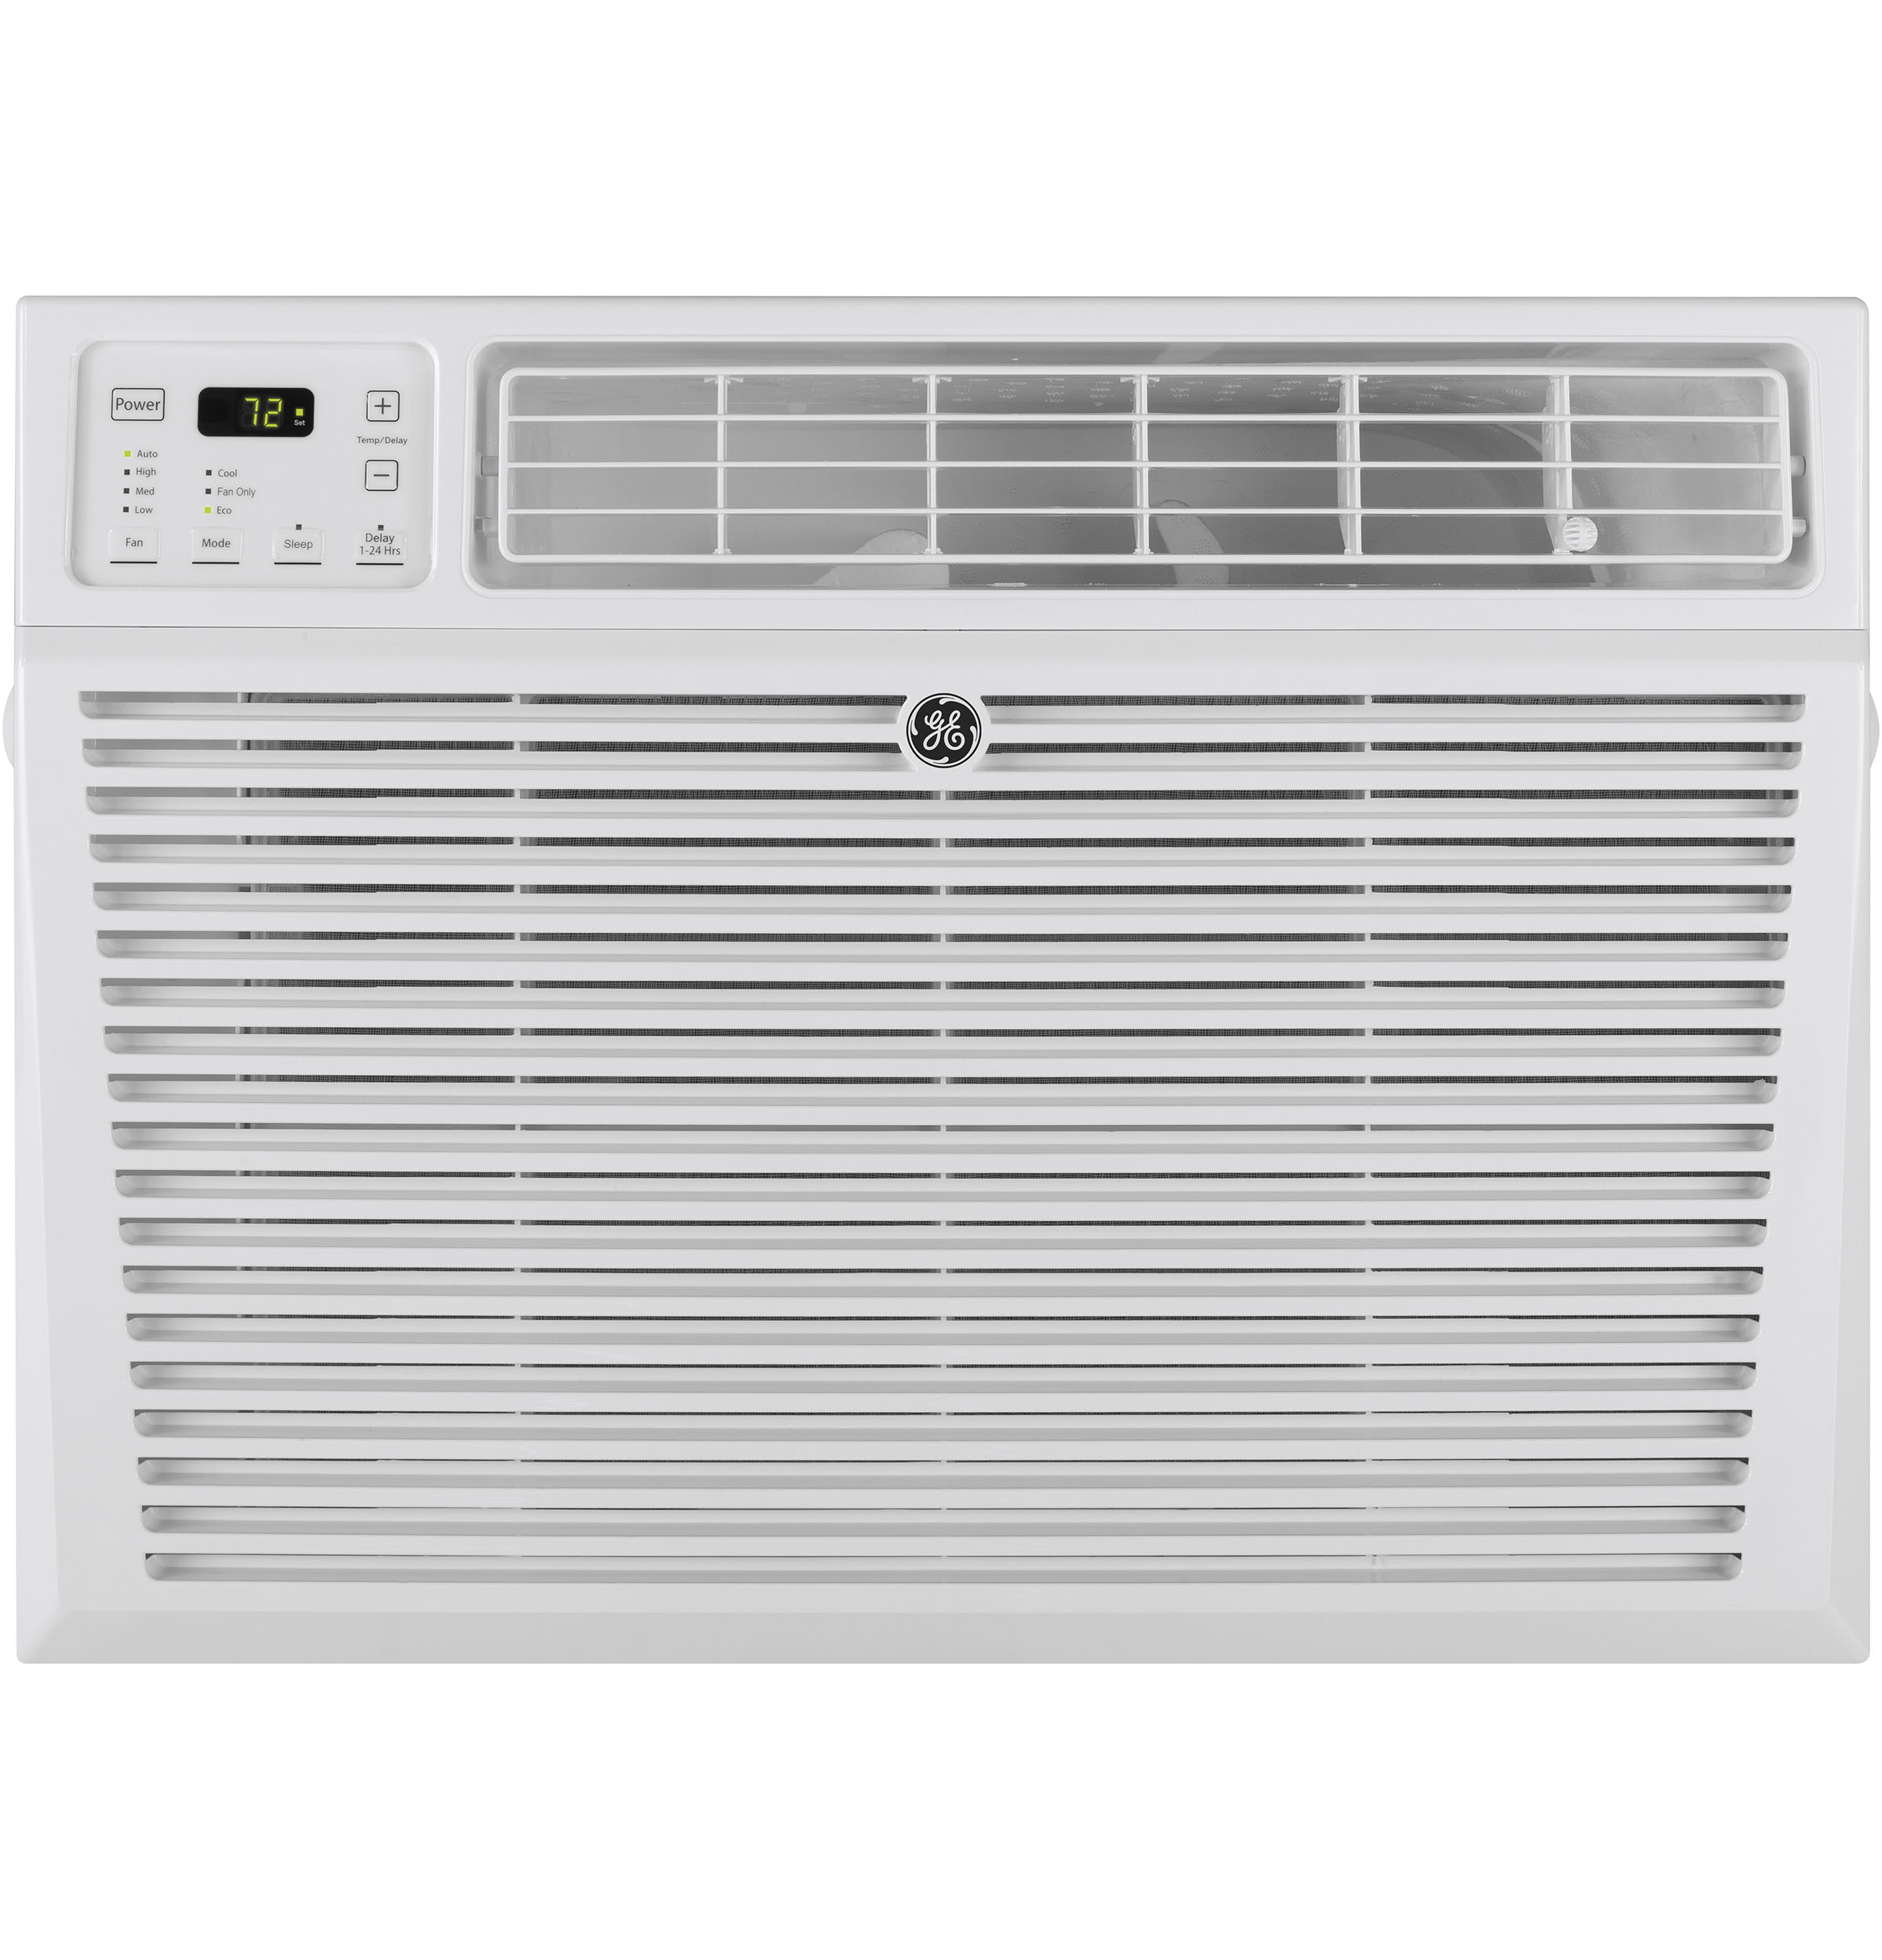 GE 8,000 BTU Window AC With Remote, AEW08LY - image 1 of 5